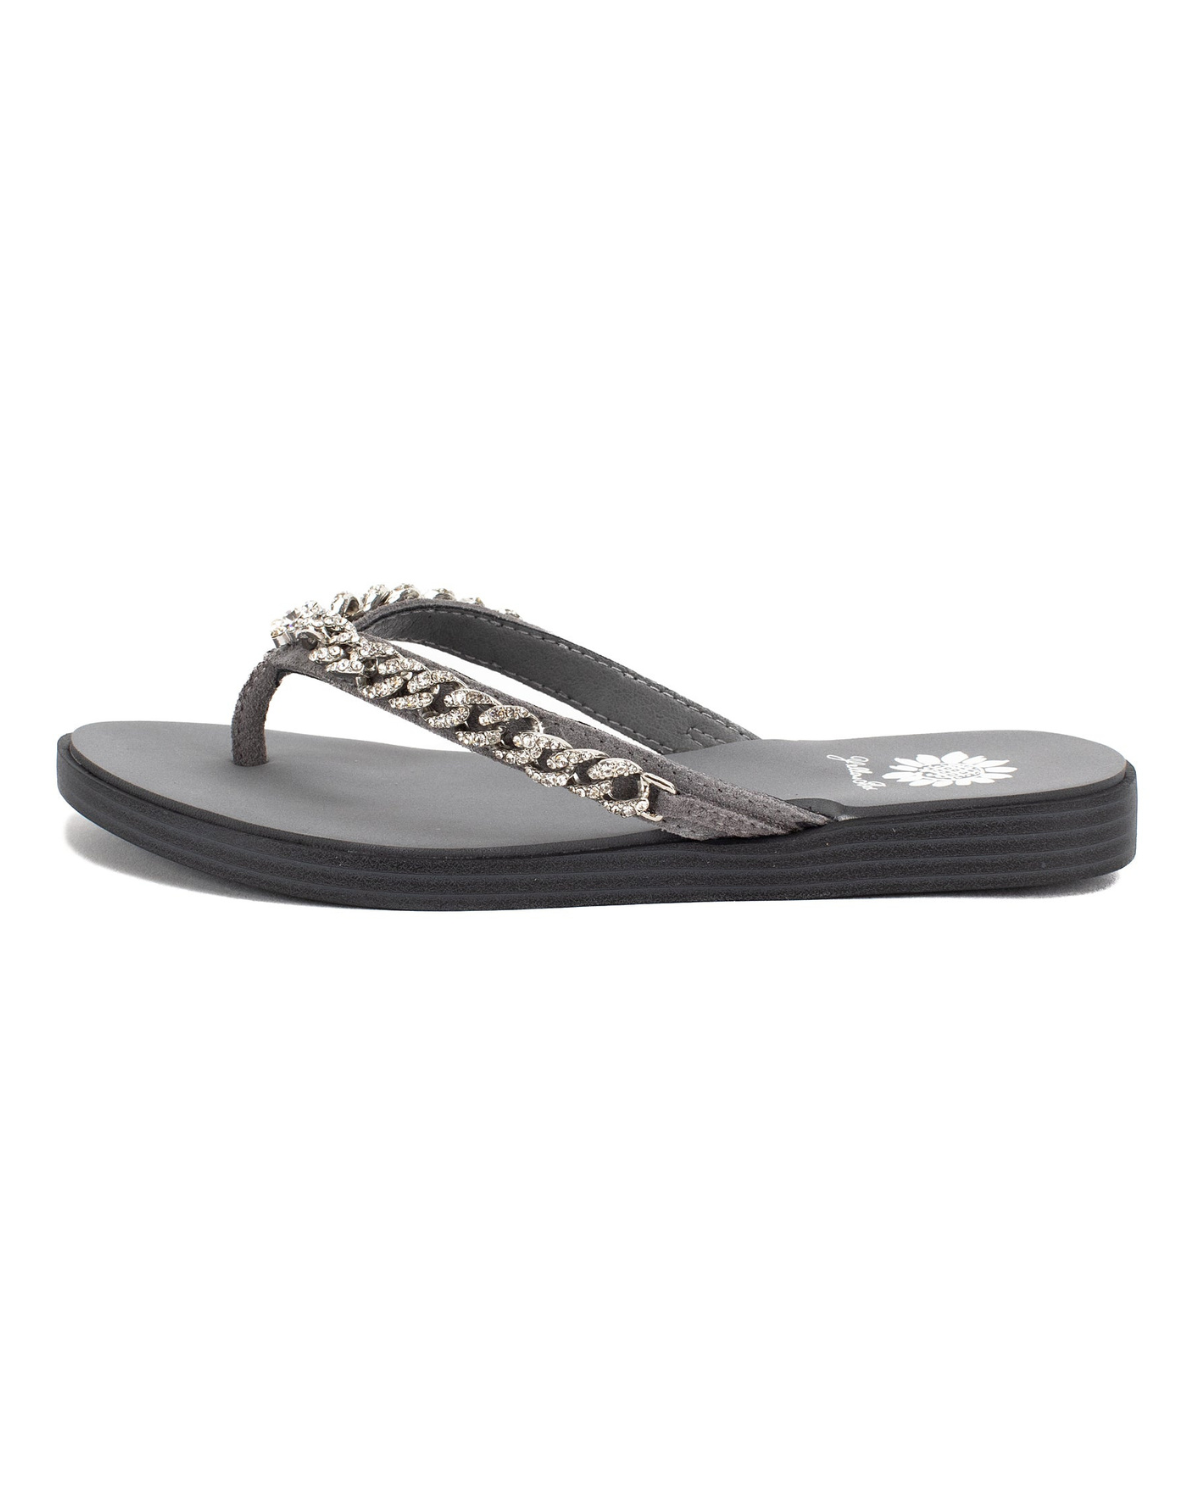 Women's grey sandal with silver chain detail on the strap.